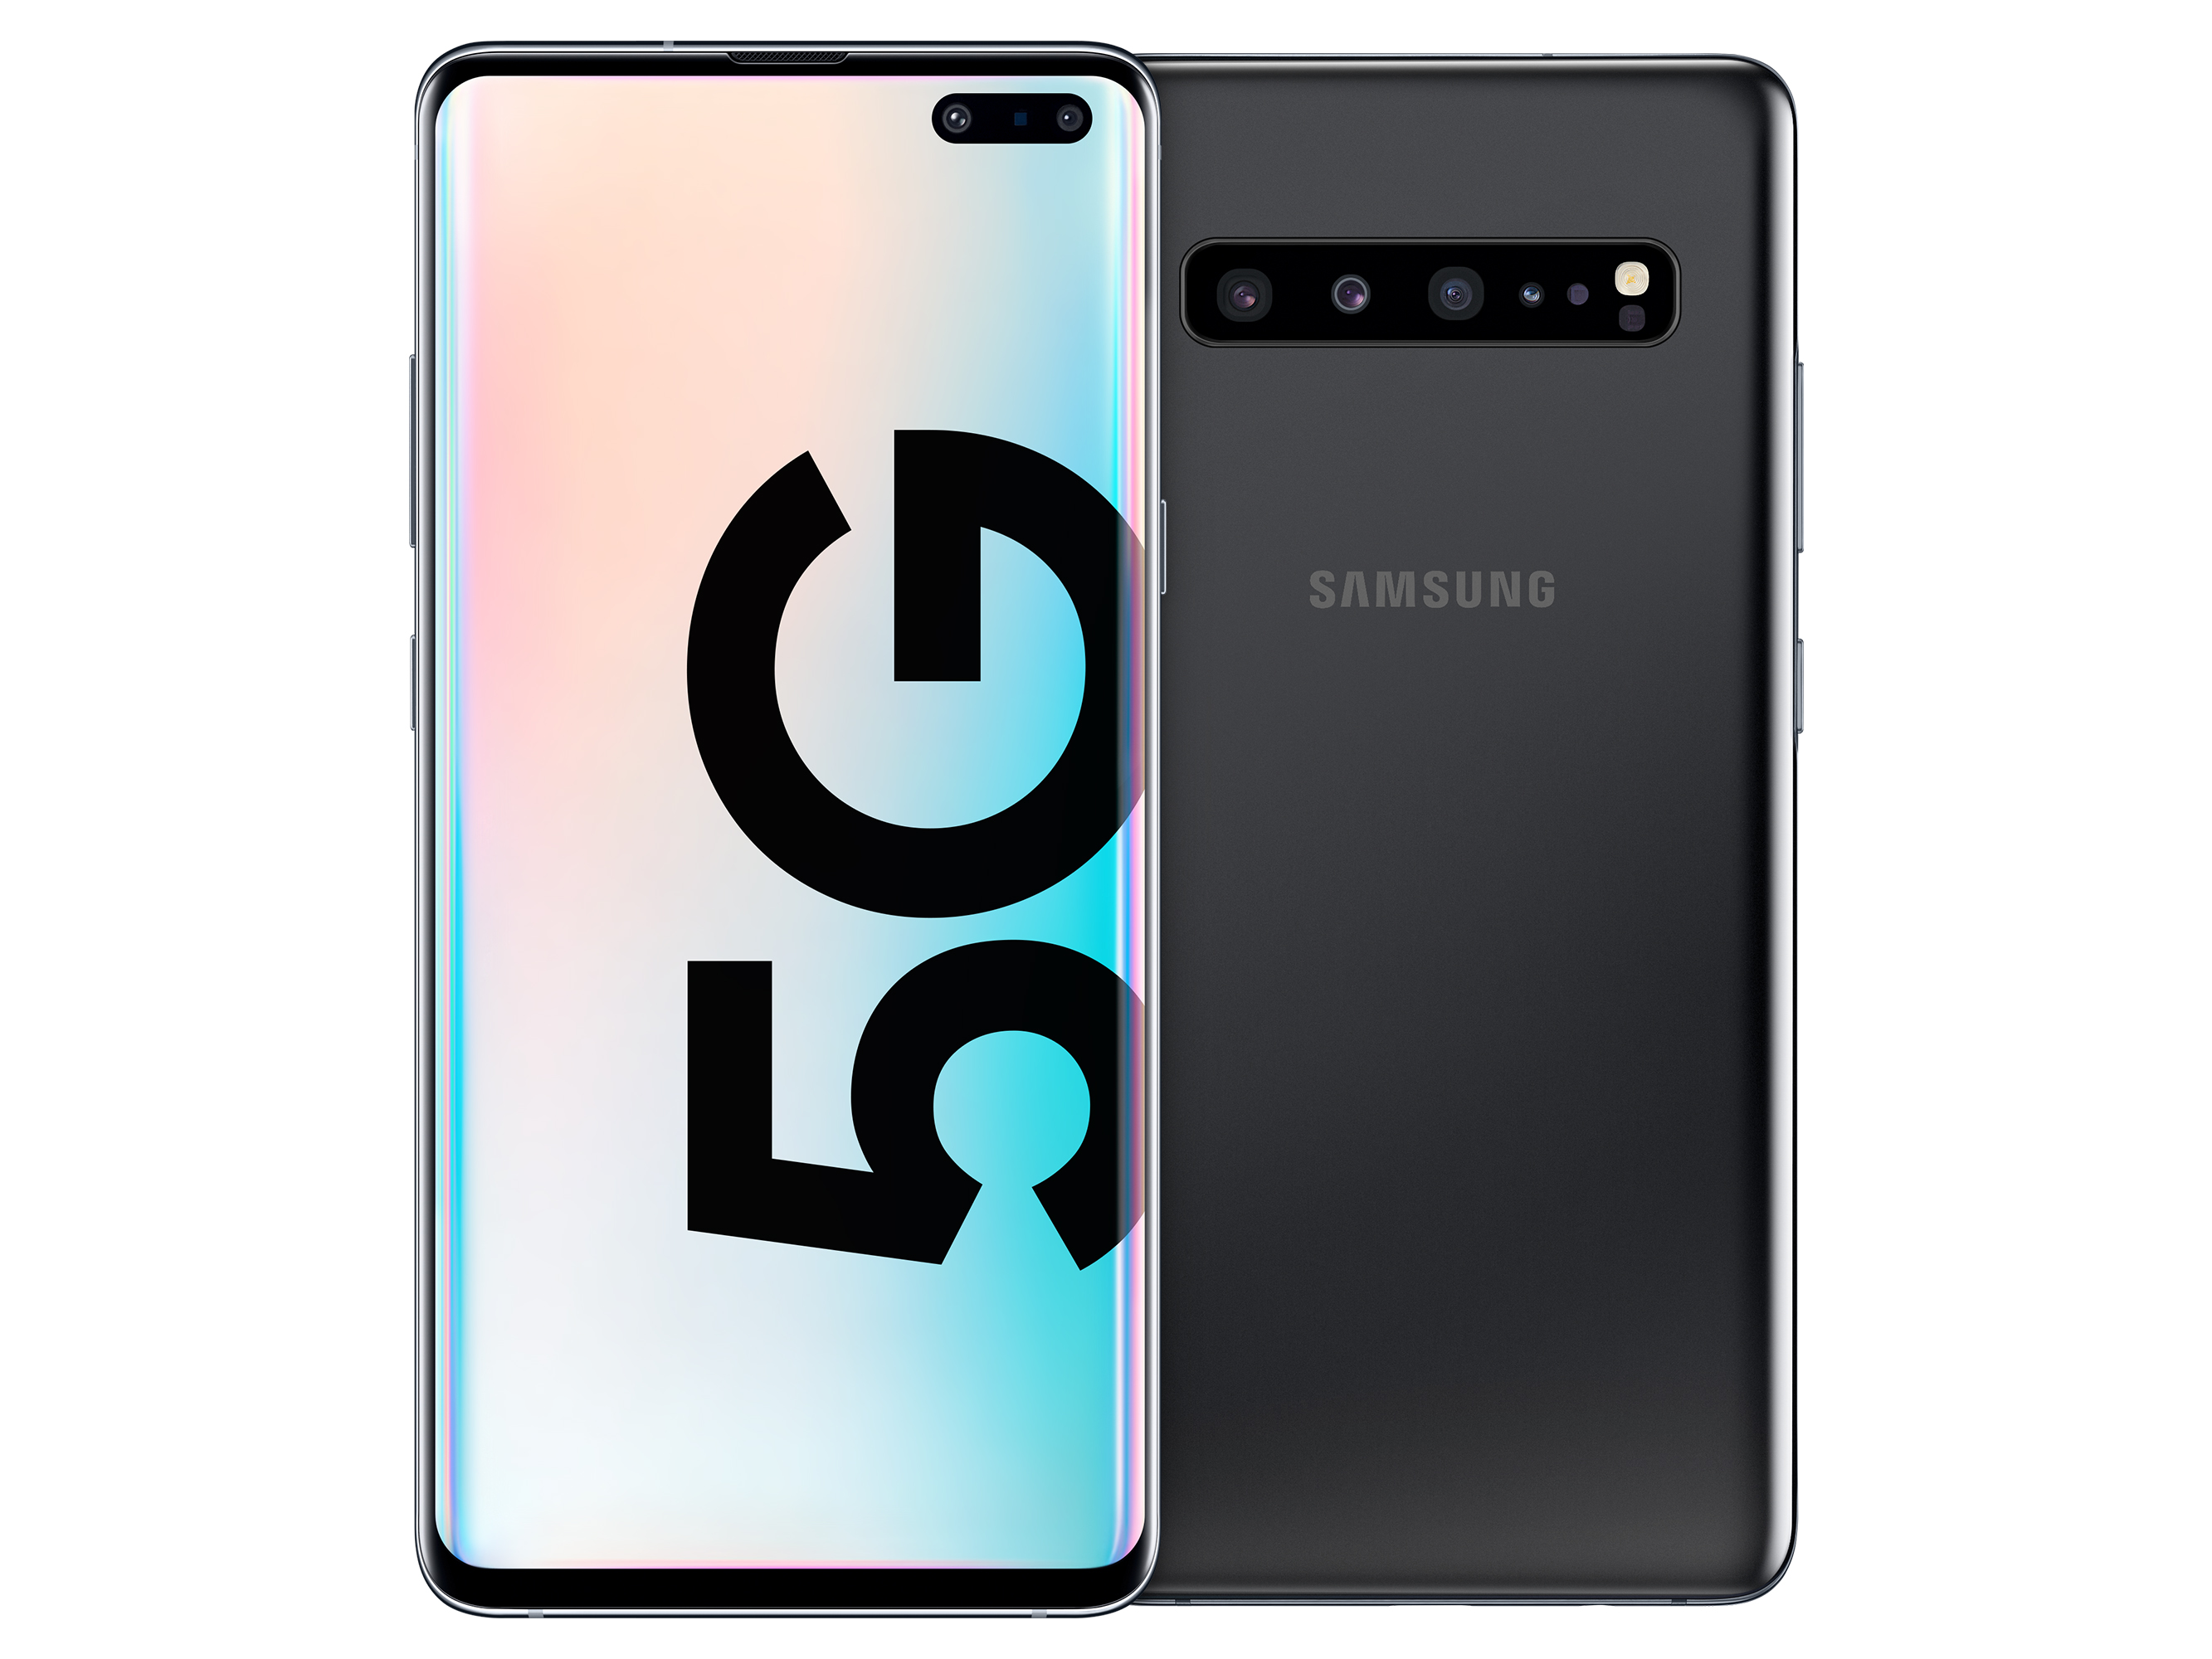  Samsung  Galaxy S10  5G  Smartphone Review A turbocharged 